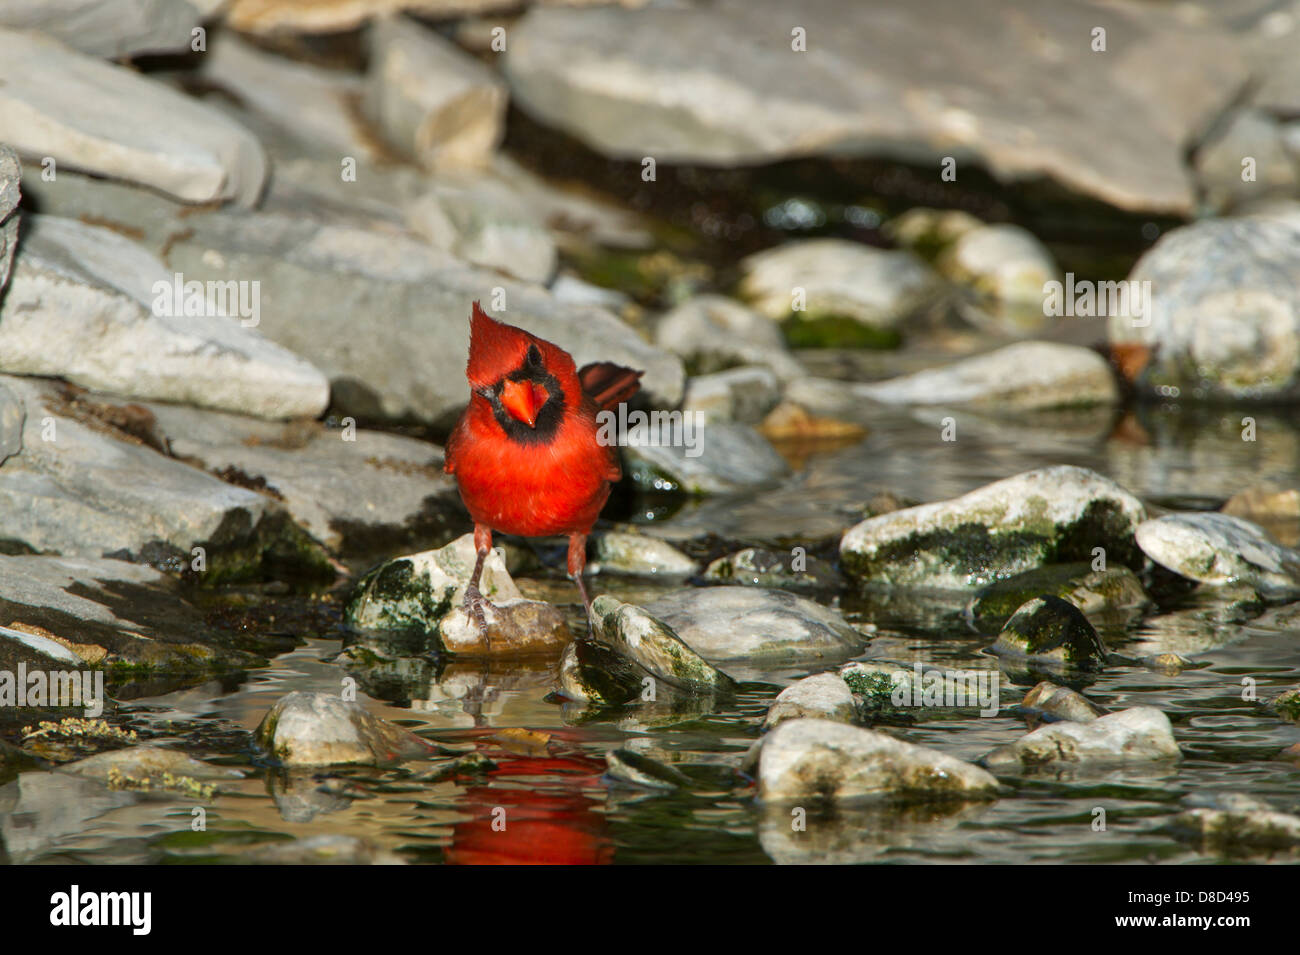 Male Northern cardinal bird bathing in a rocky puddle, Christoval, Texas, USA Stock Photo